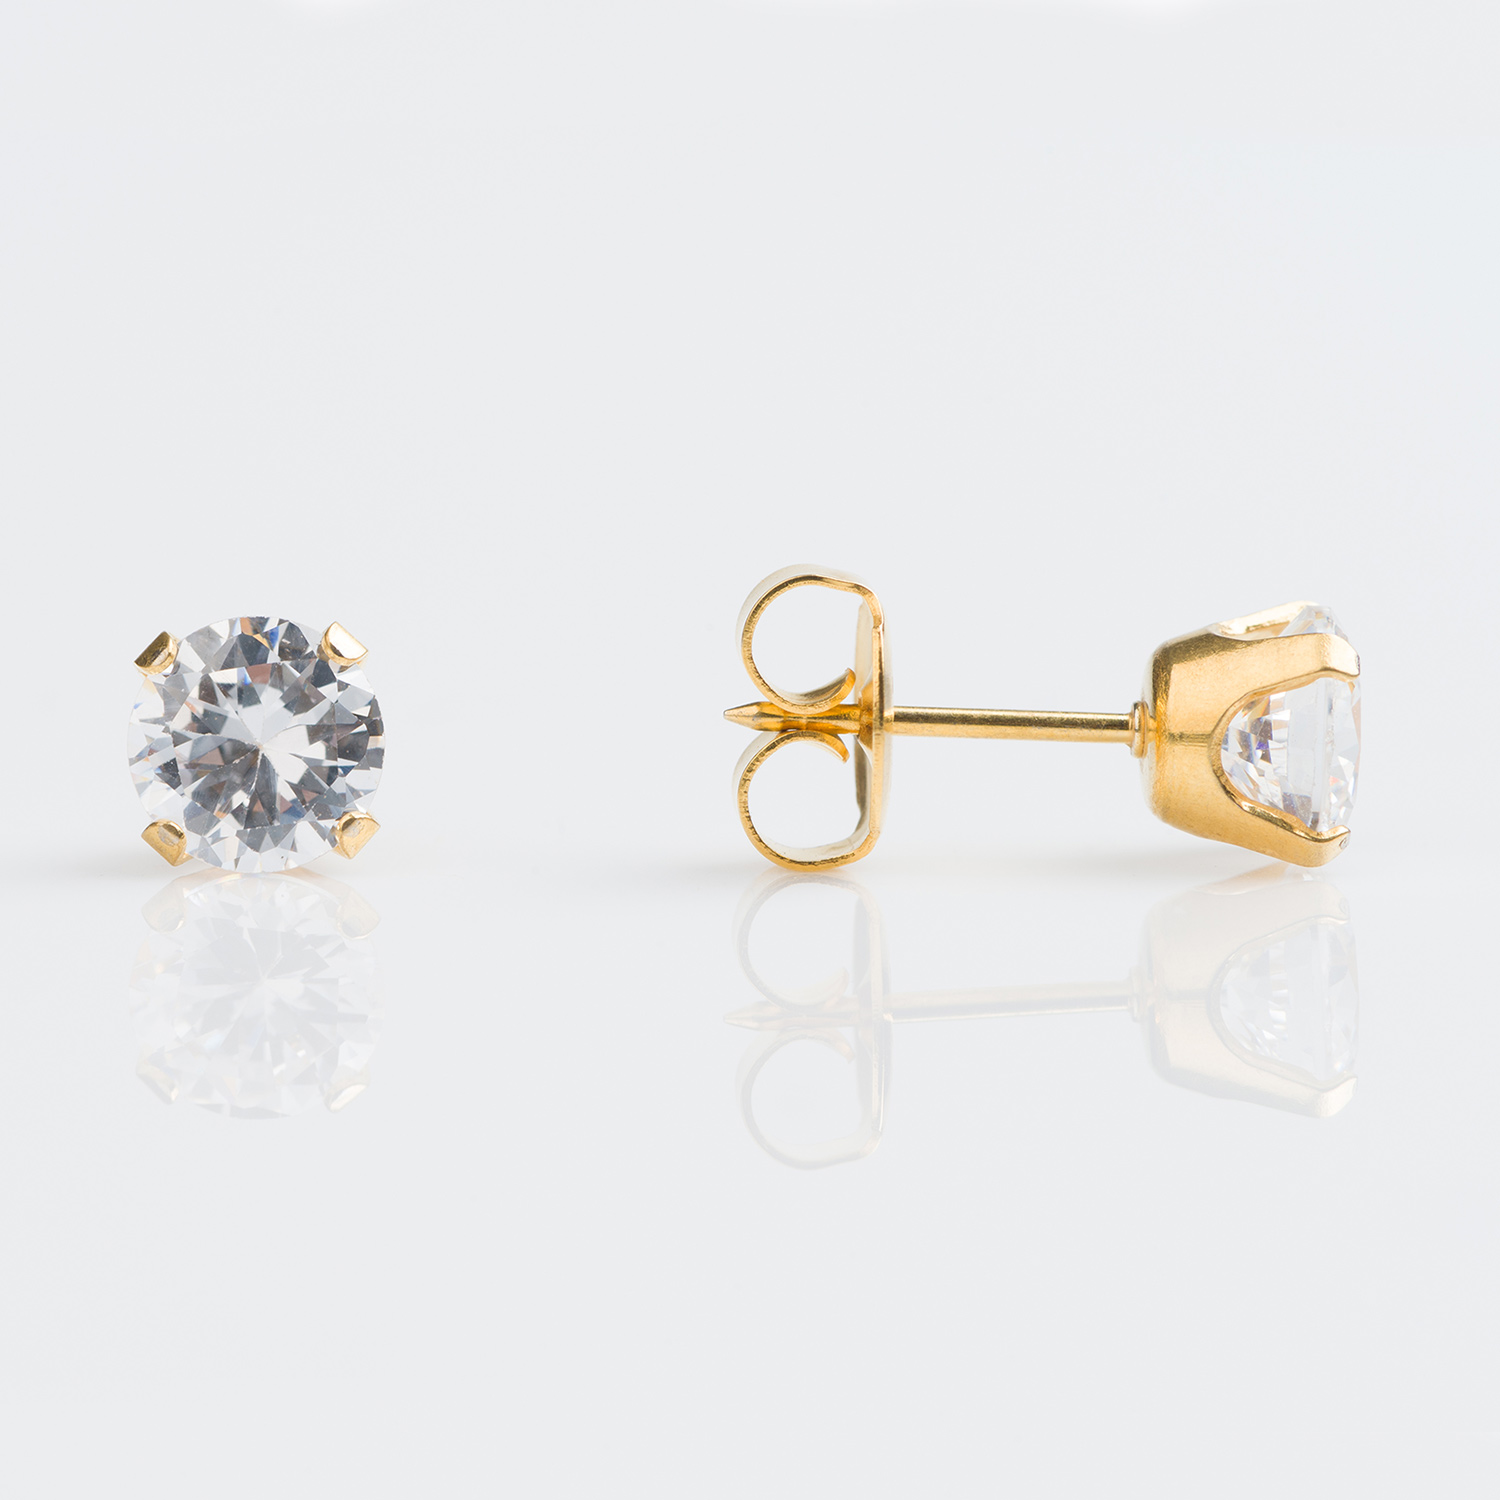 S6100STX – Studex Sensitive Gold Plated Tiff. 6mm Cubic Zirconia Earrings